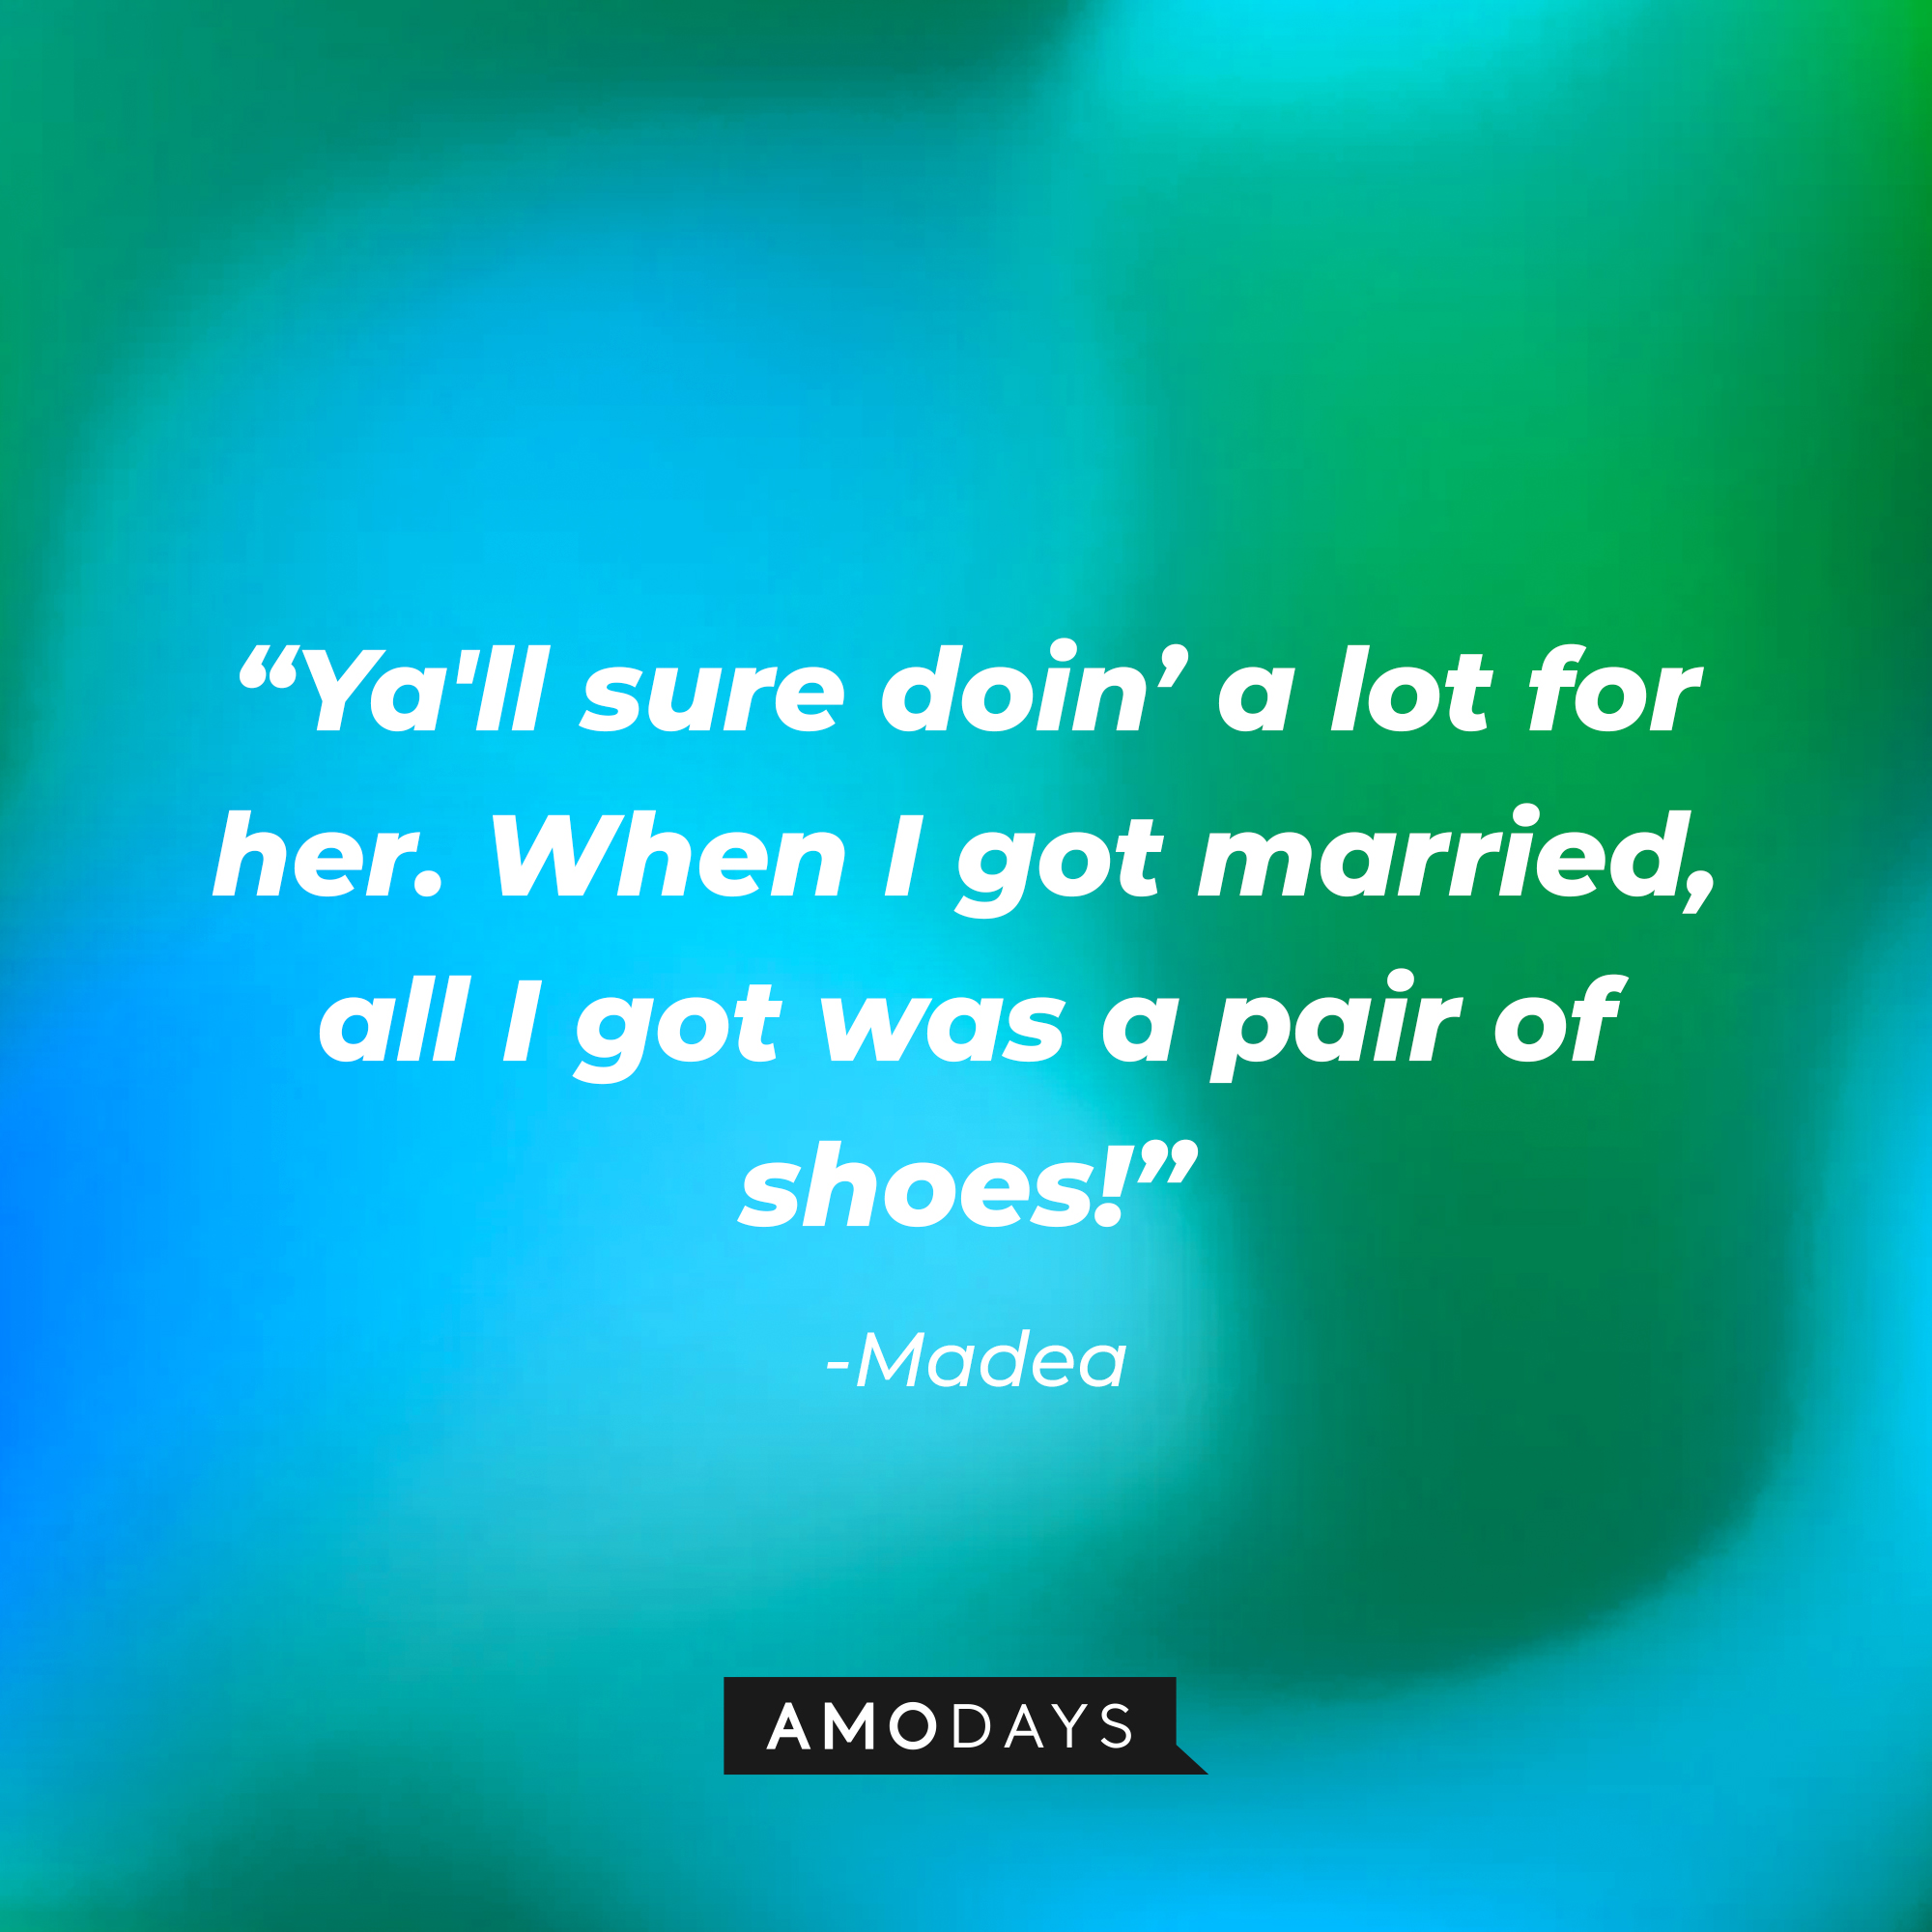 Madea’s quote:  "Ya'll sure doin' a lot for her; when I got married, all I got was a pair of shoes!" | Source: AmoDays